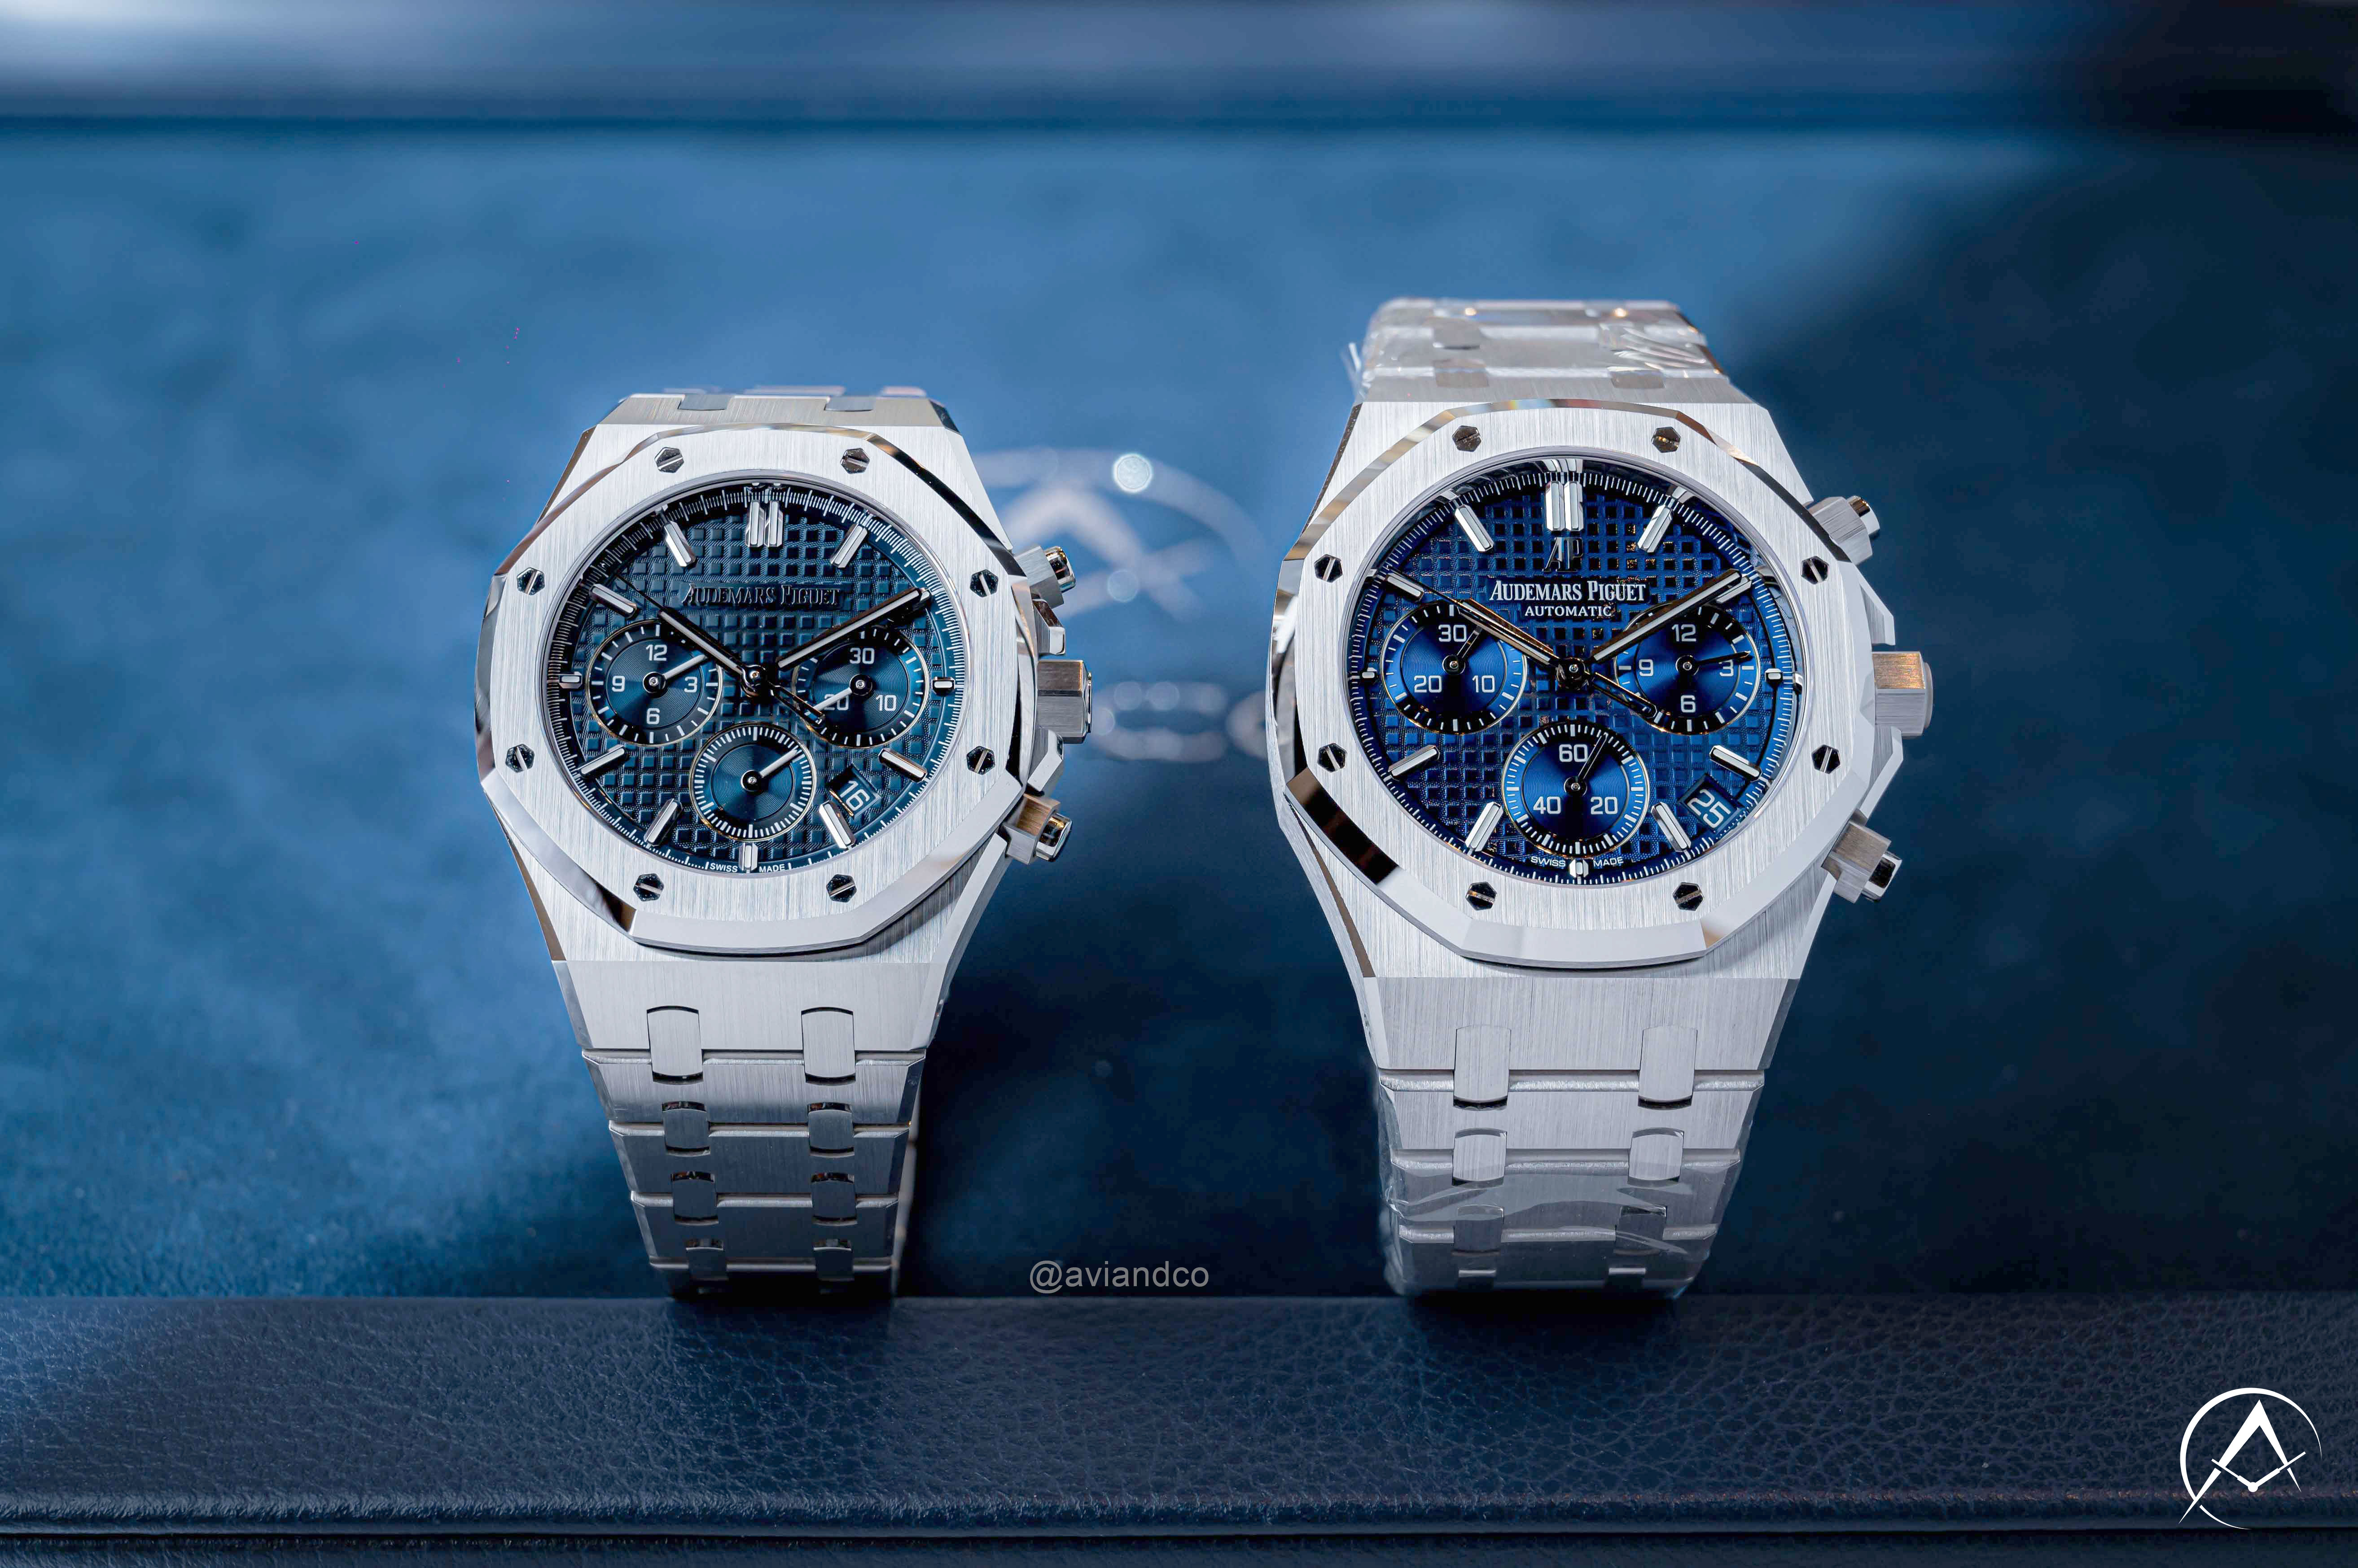 Stainless Steel and 18K White Gold 41 mm Audemars Piguet Royal Oak Chronograph Luxury Timepieces with Blue Dials Displayed on Clear C-Rings Above a Navy Blue Avi & Co. Watch Pad.